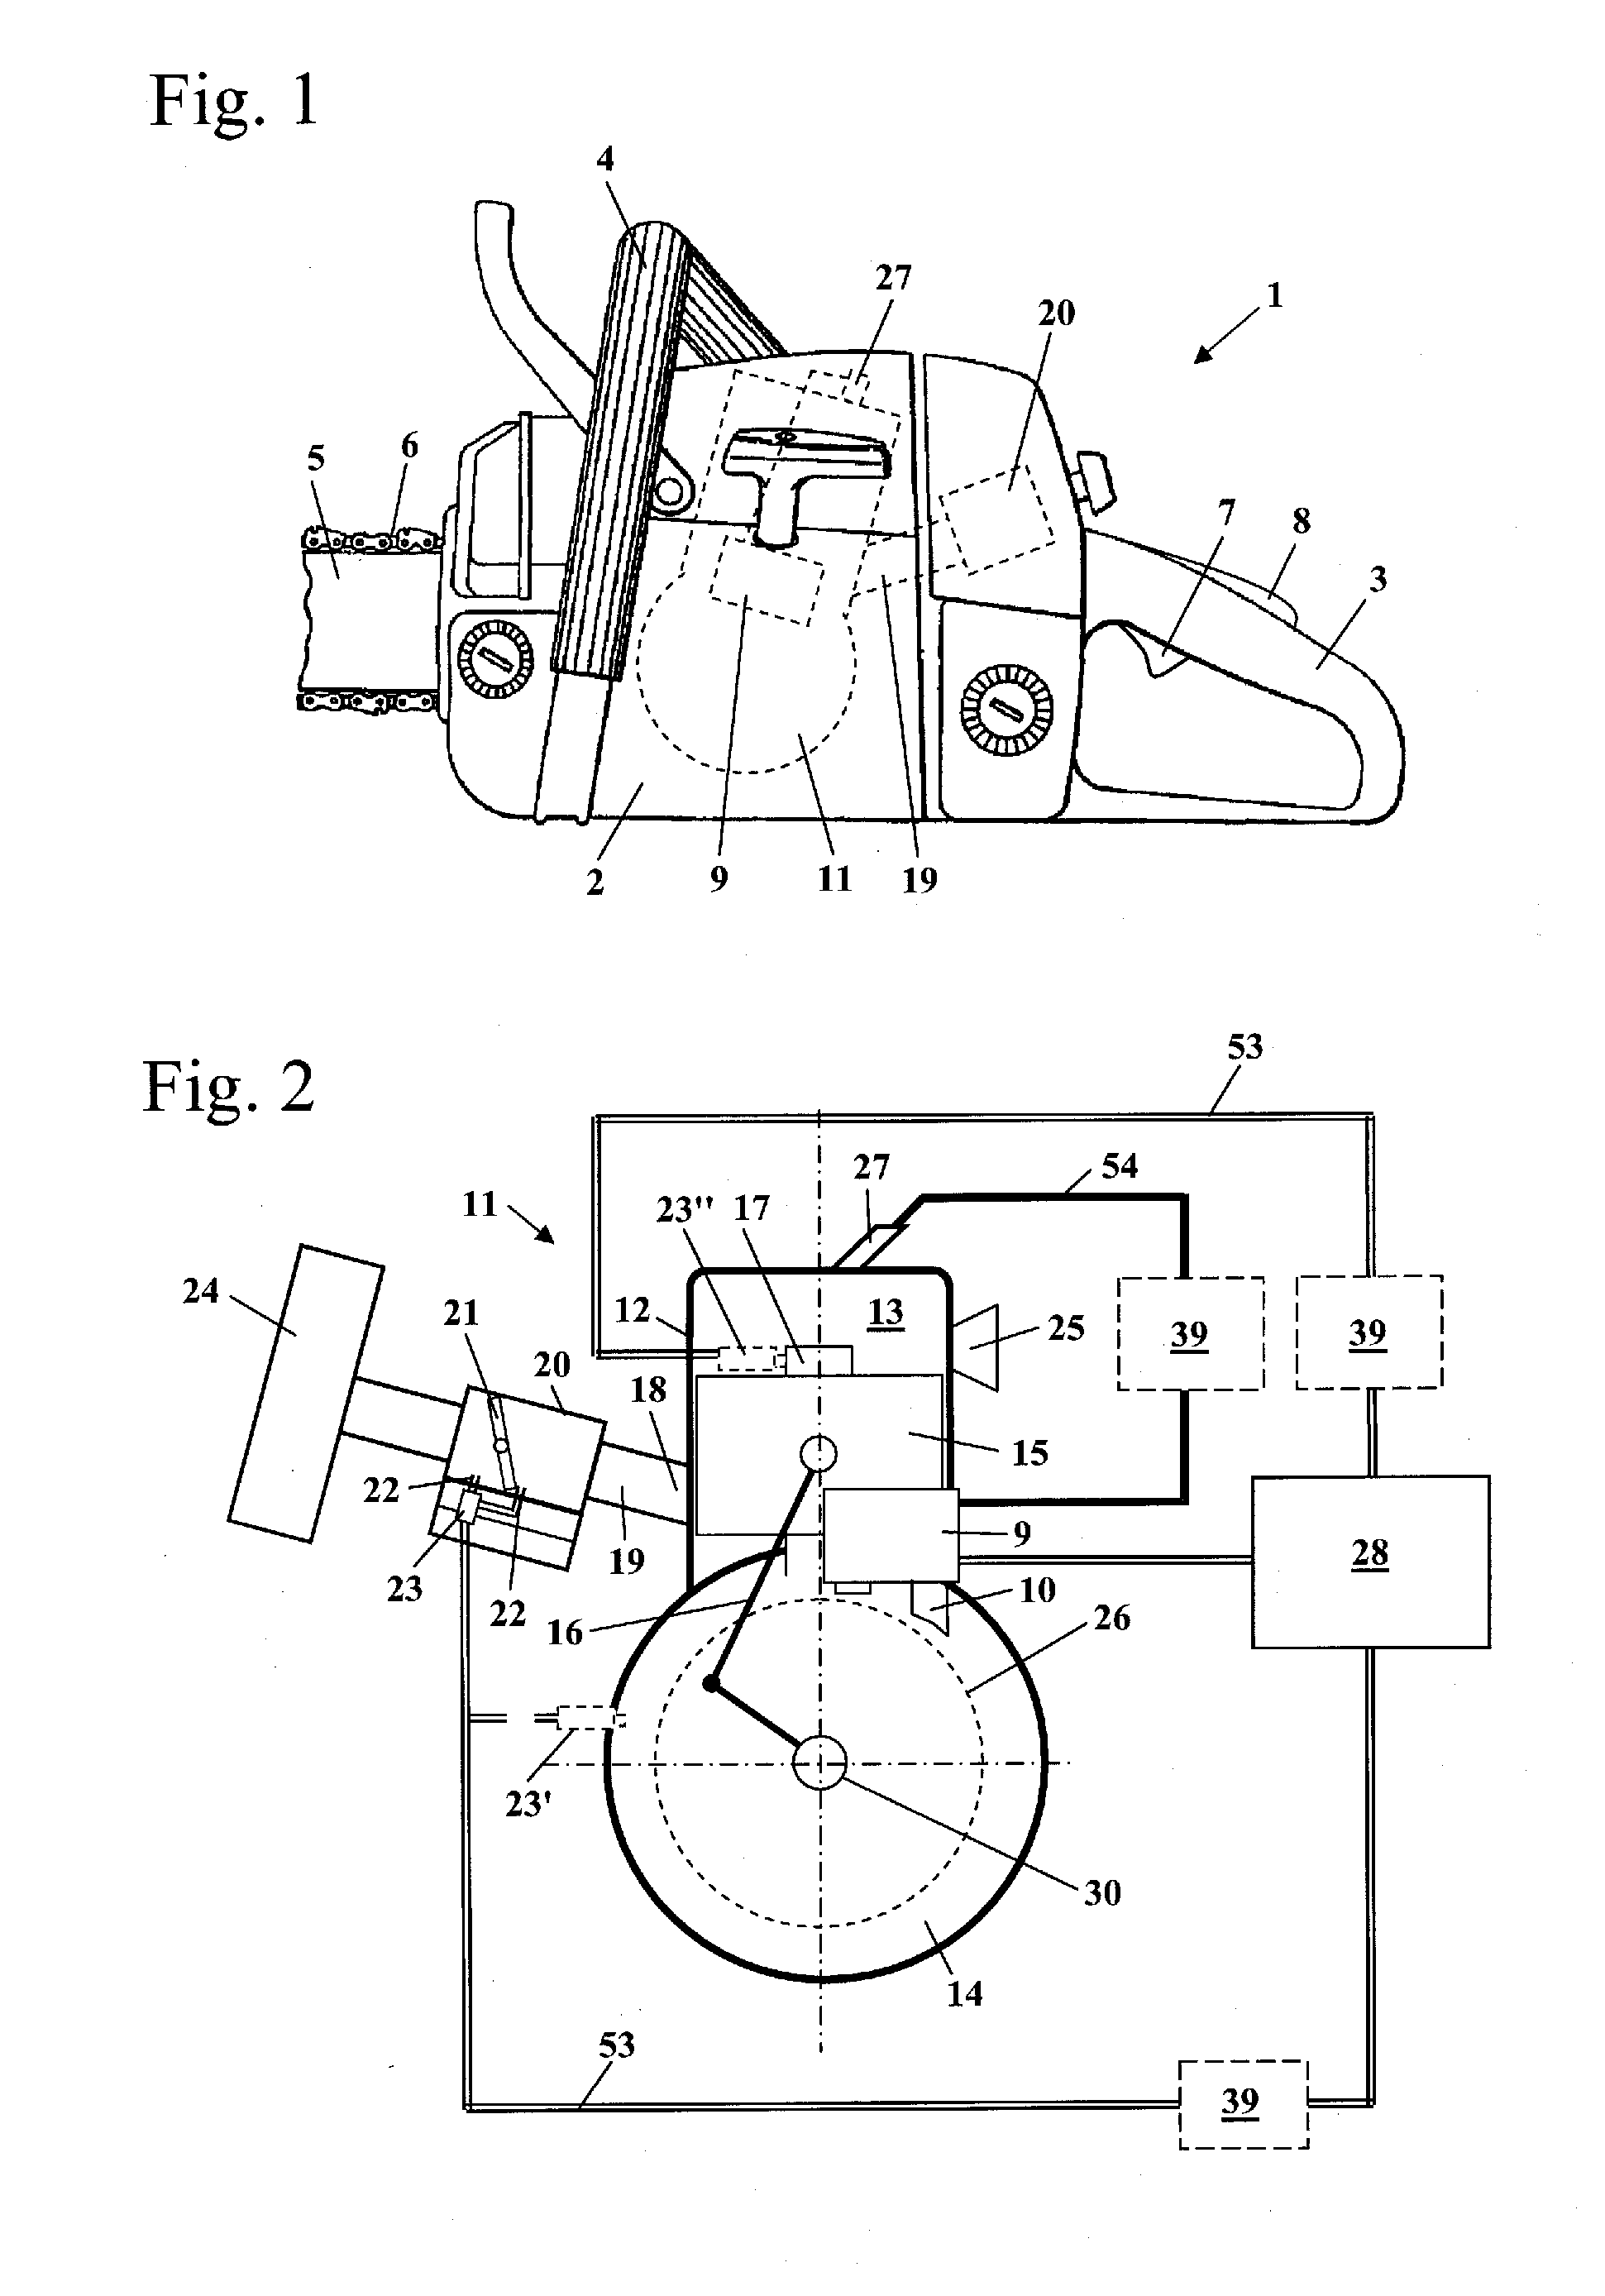 Method for Damage Diagnosis in a Handheld Work Apparatus